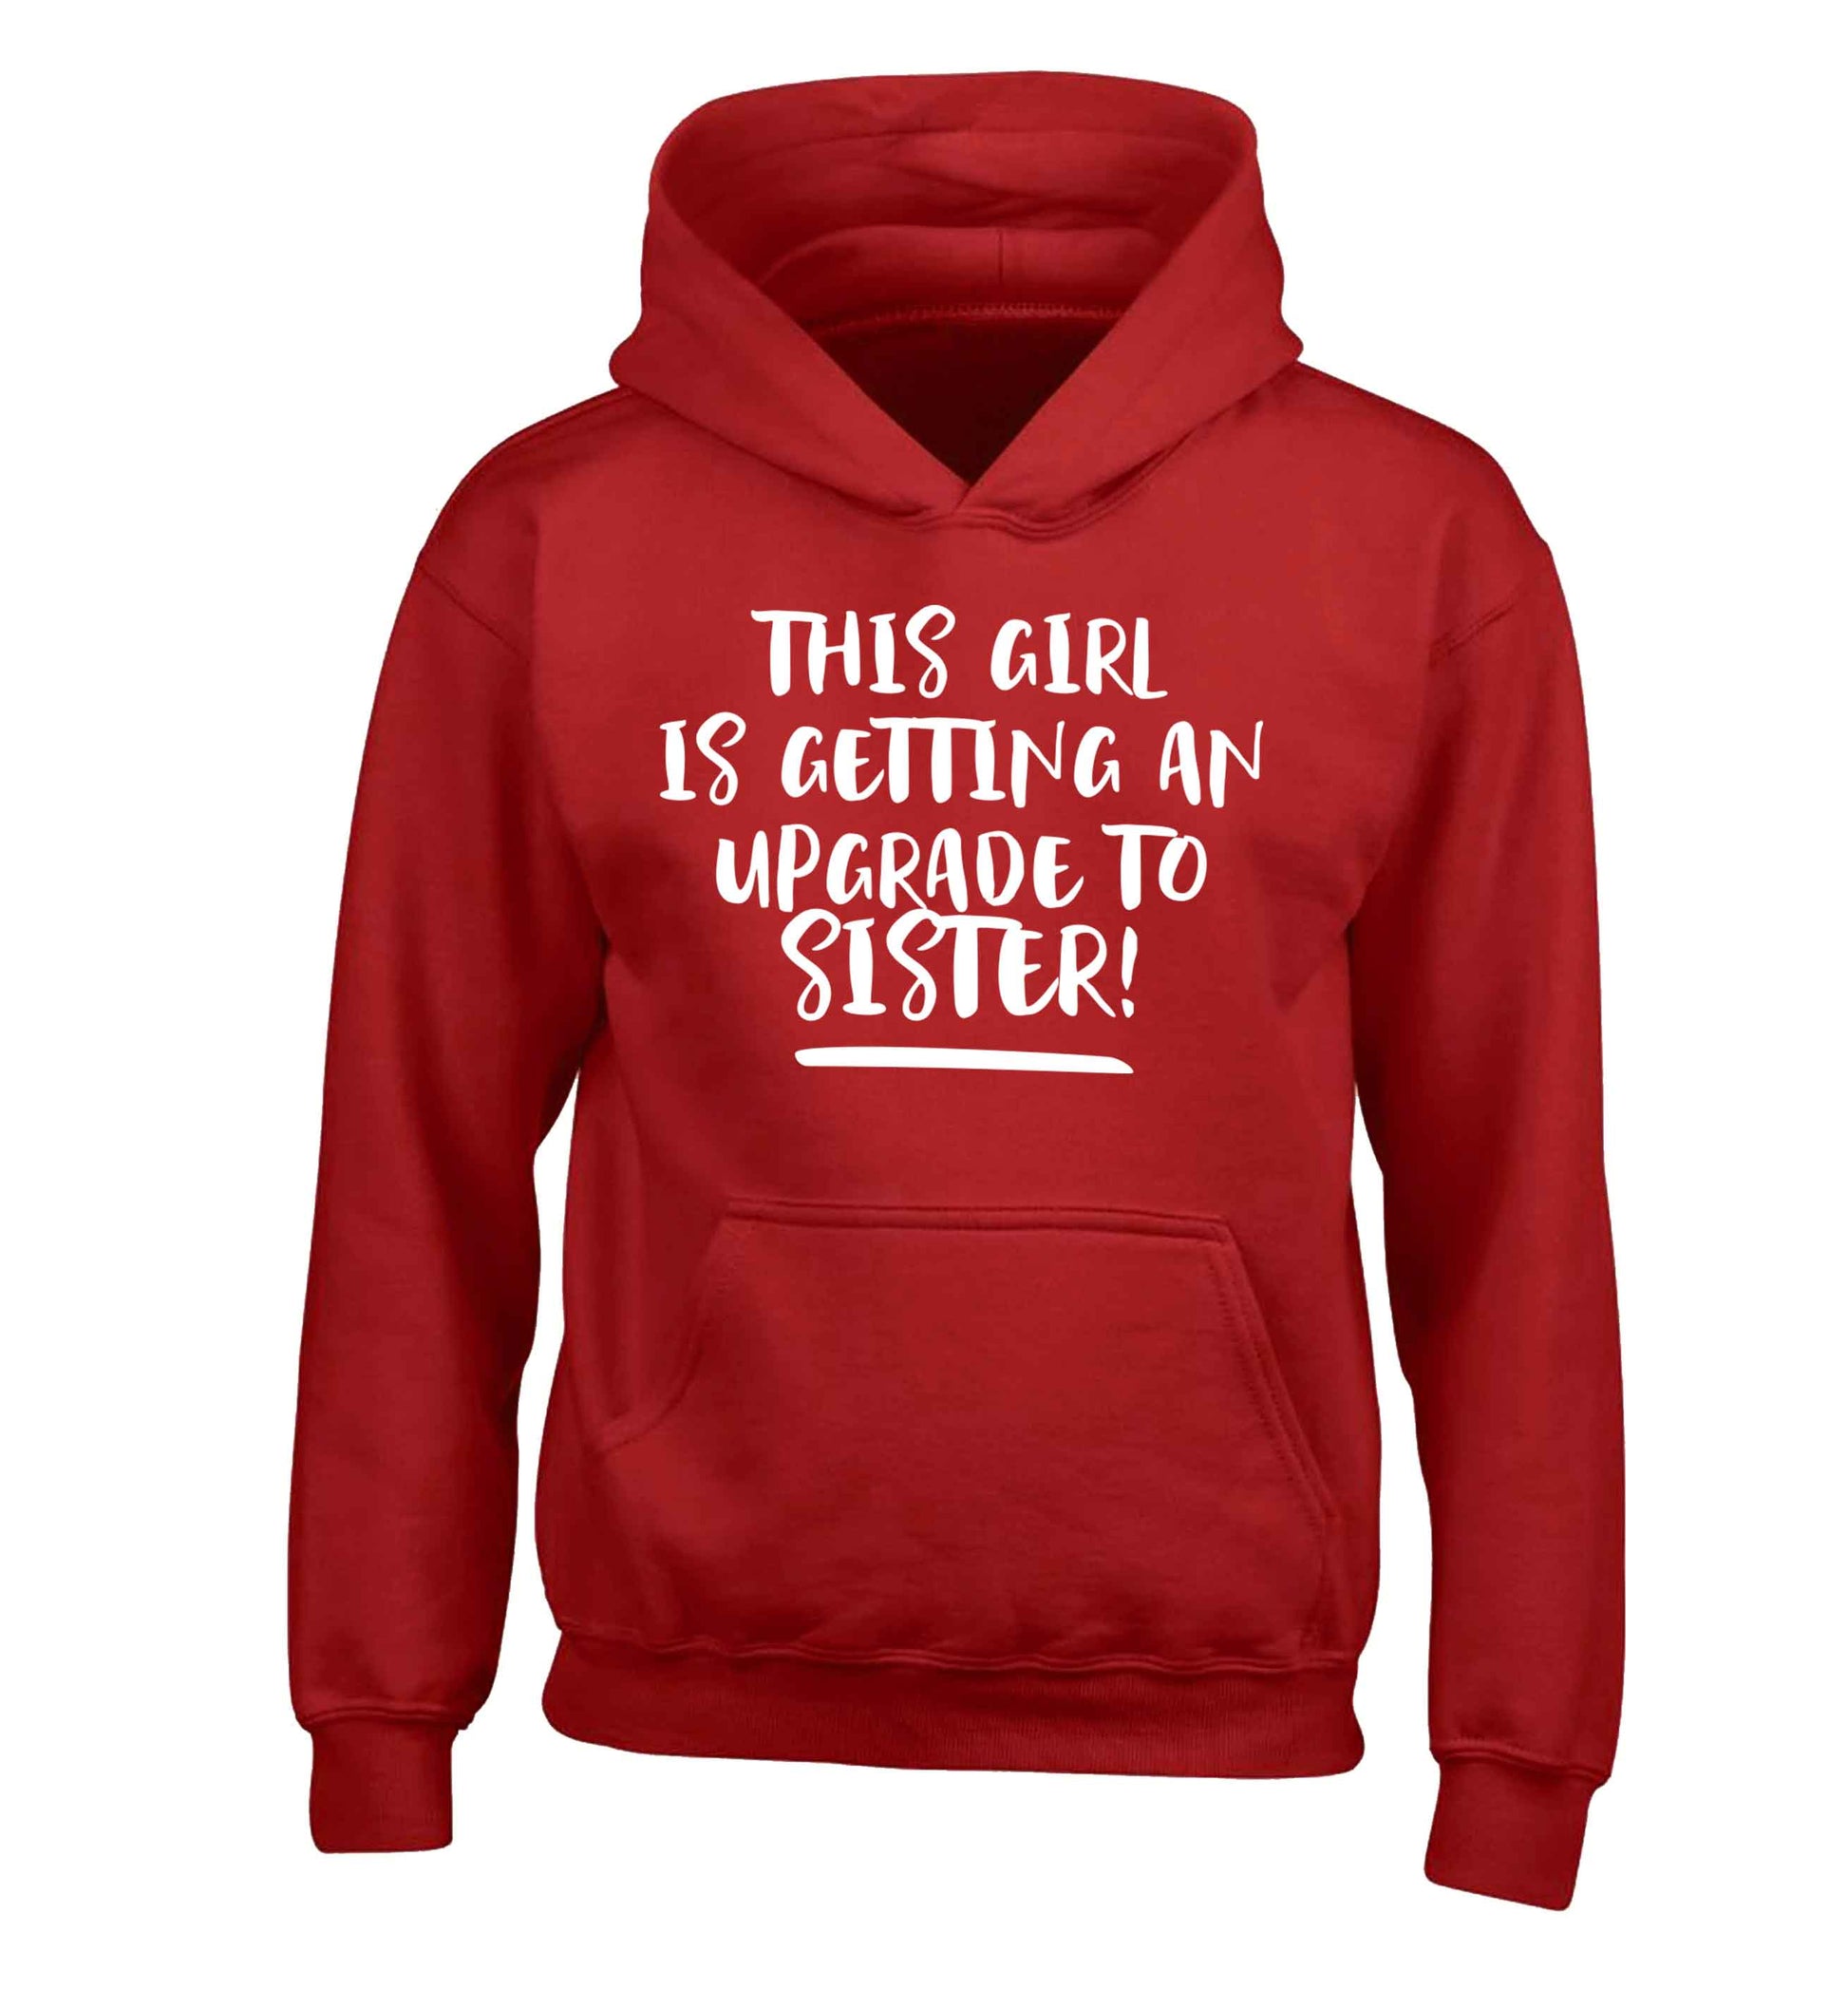 This girl is getting an upgrade to sister! children's red hoodie 12-13 Years